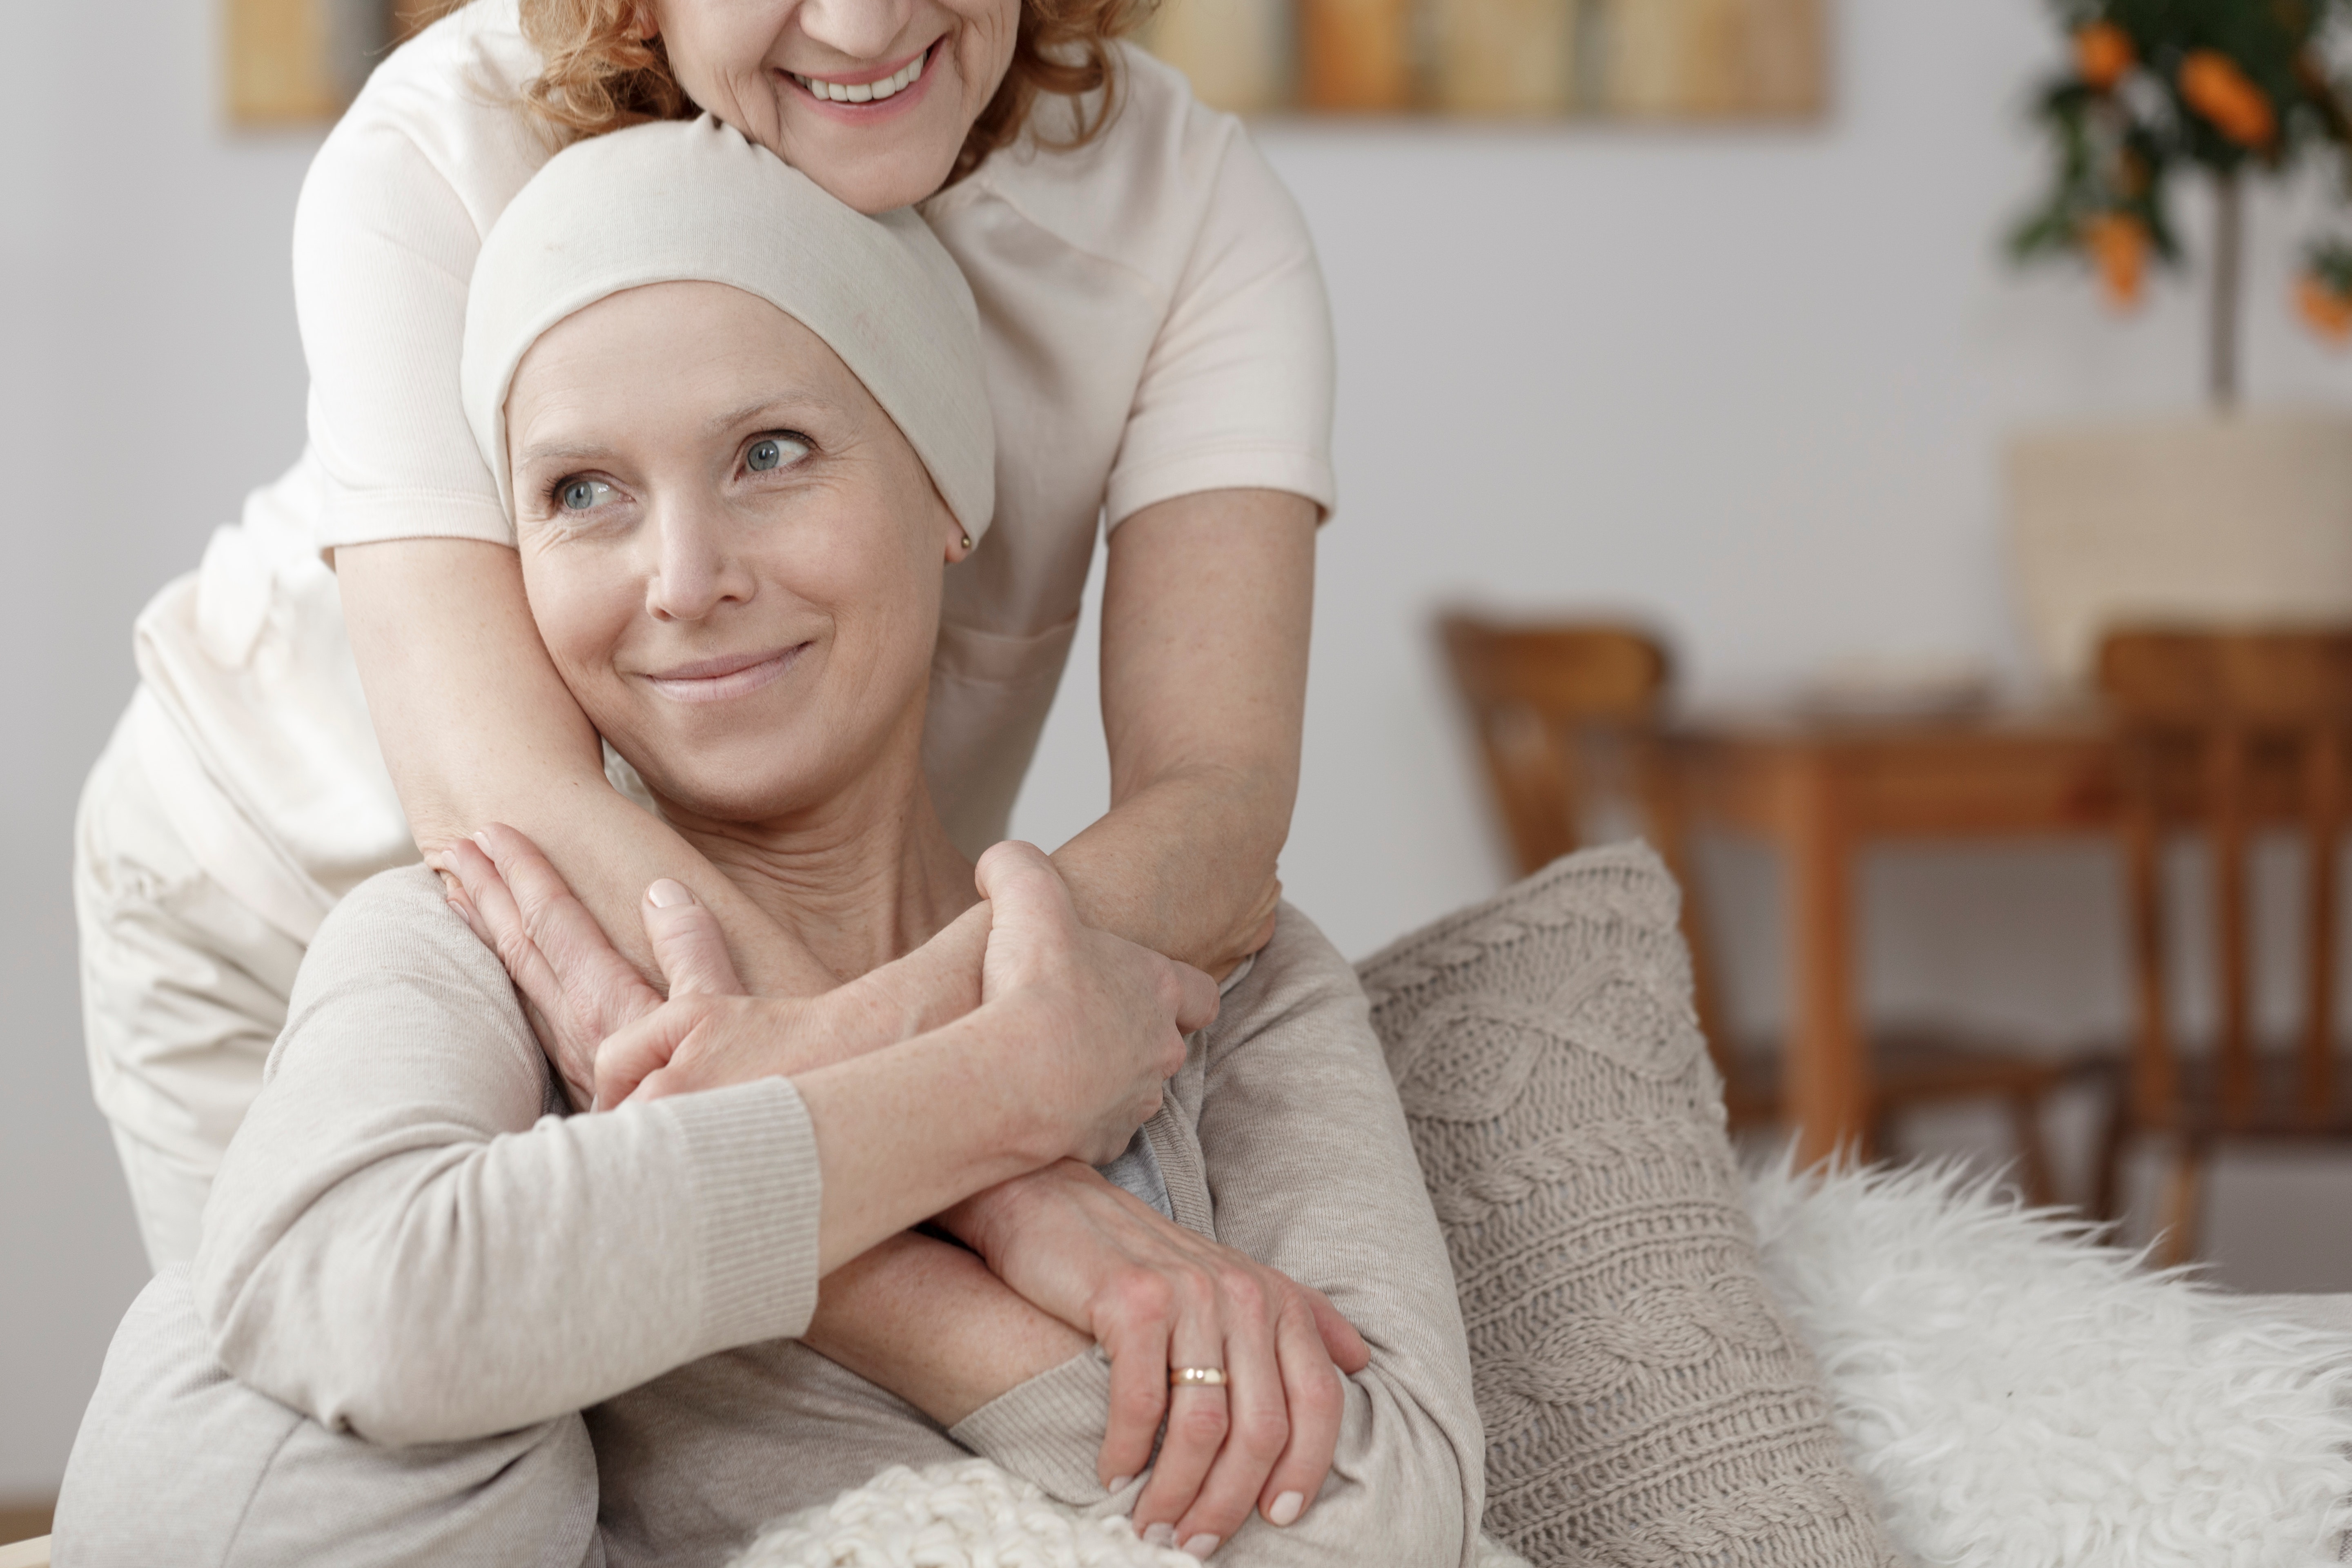 Cancer pain can be eased by palliative radiation therapy